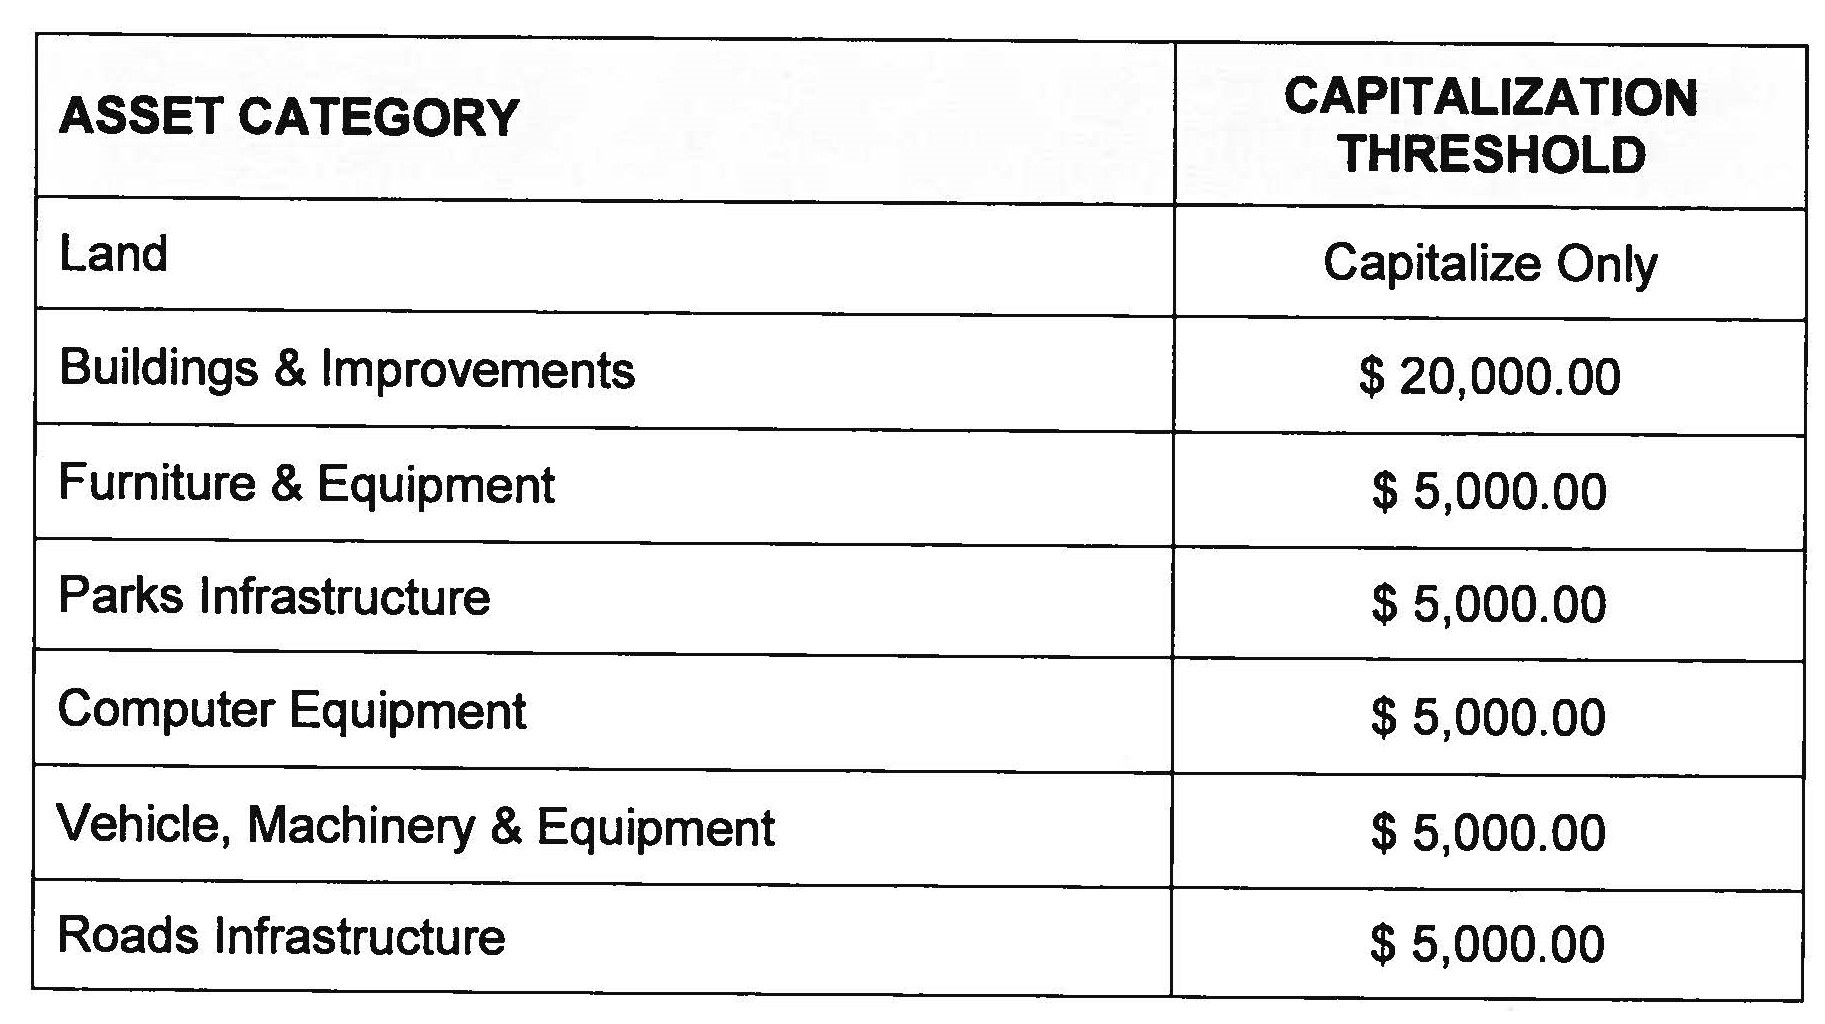 table showing asset category and capitalization threshold